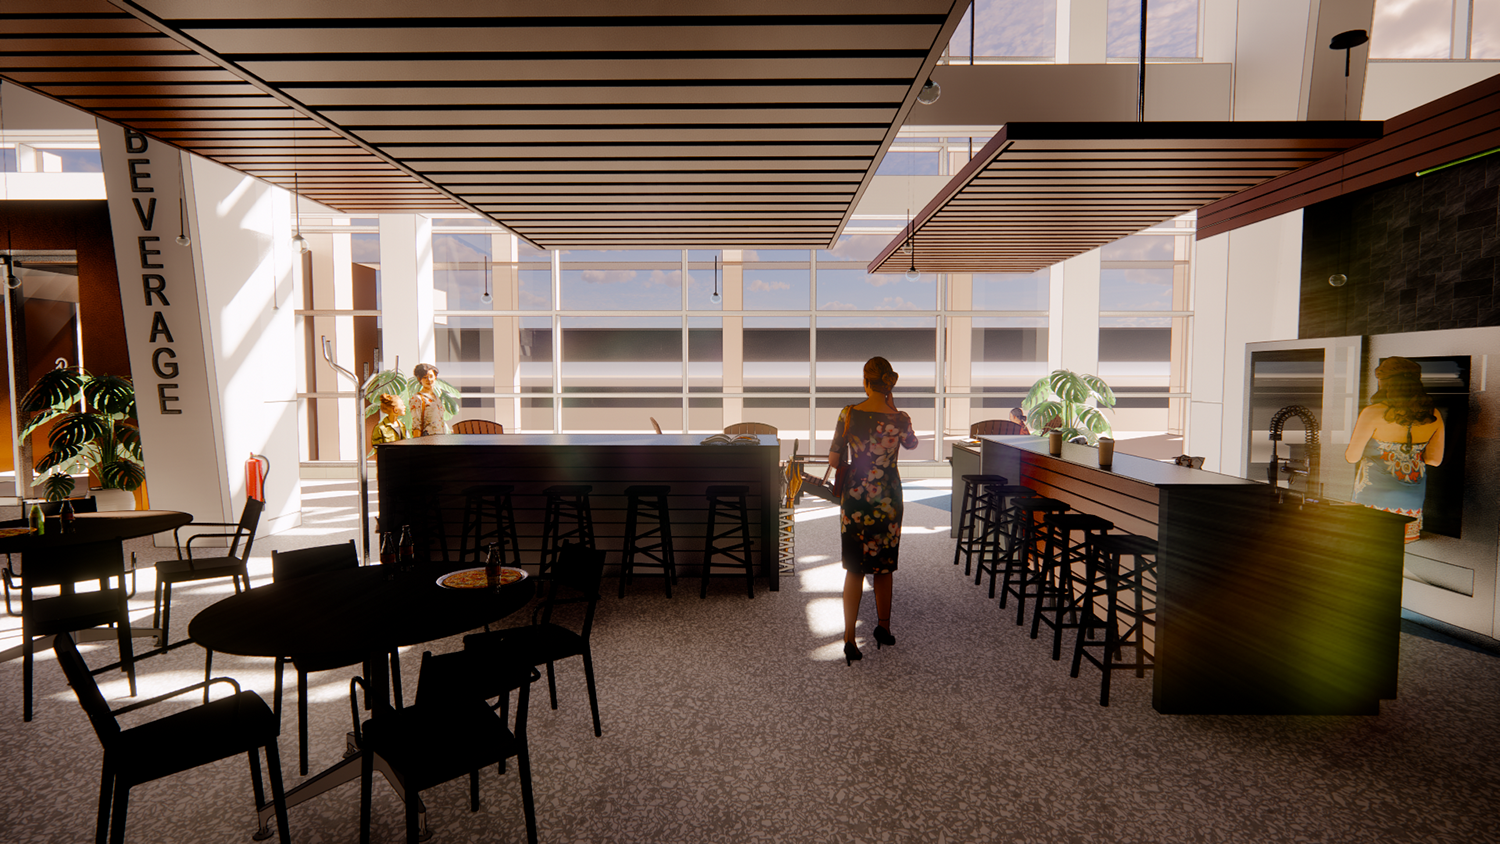 A rendering of a pre-security food and beverage space.